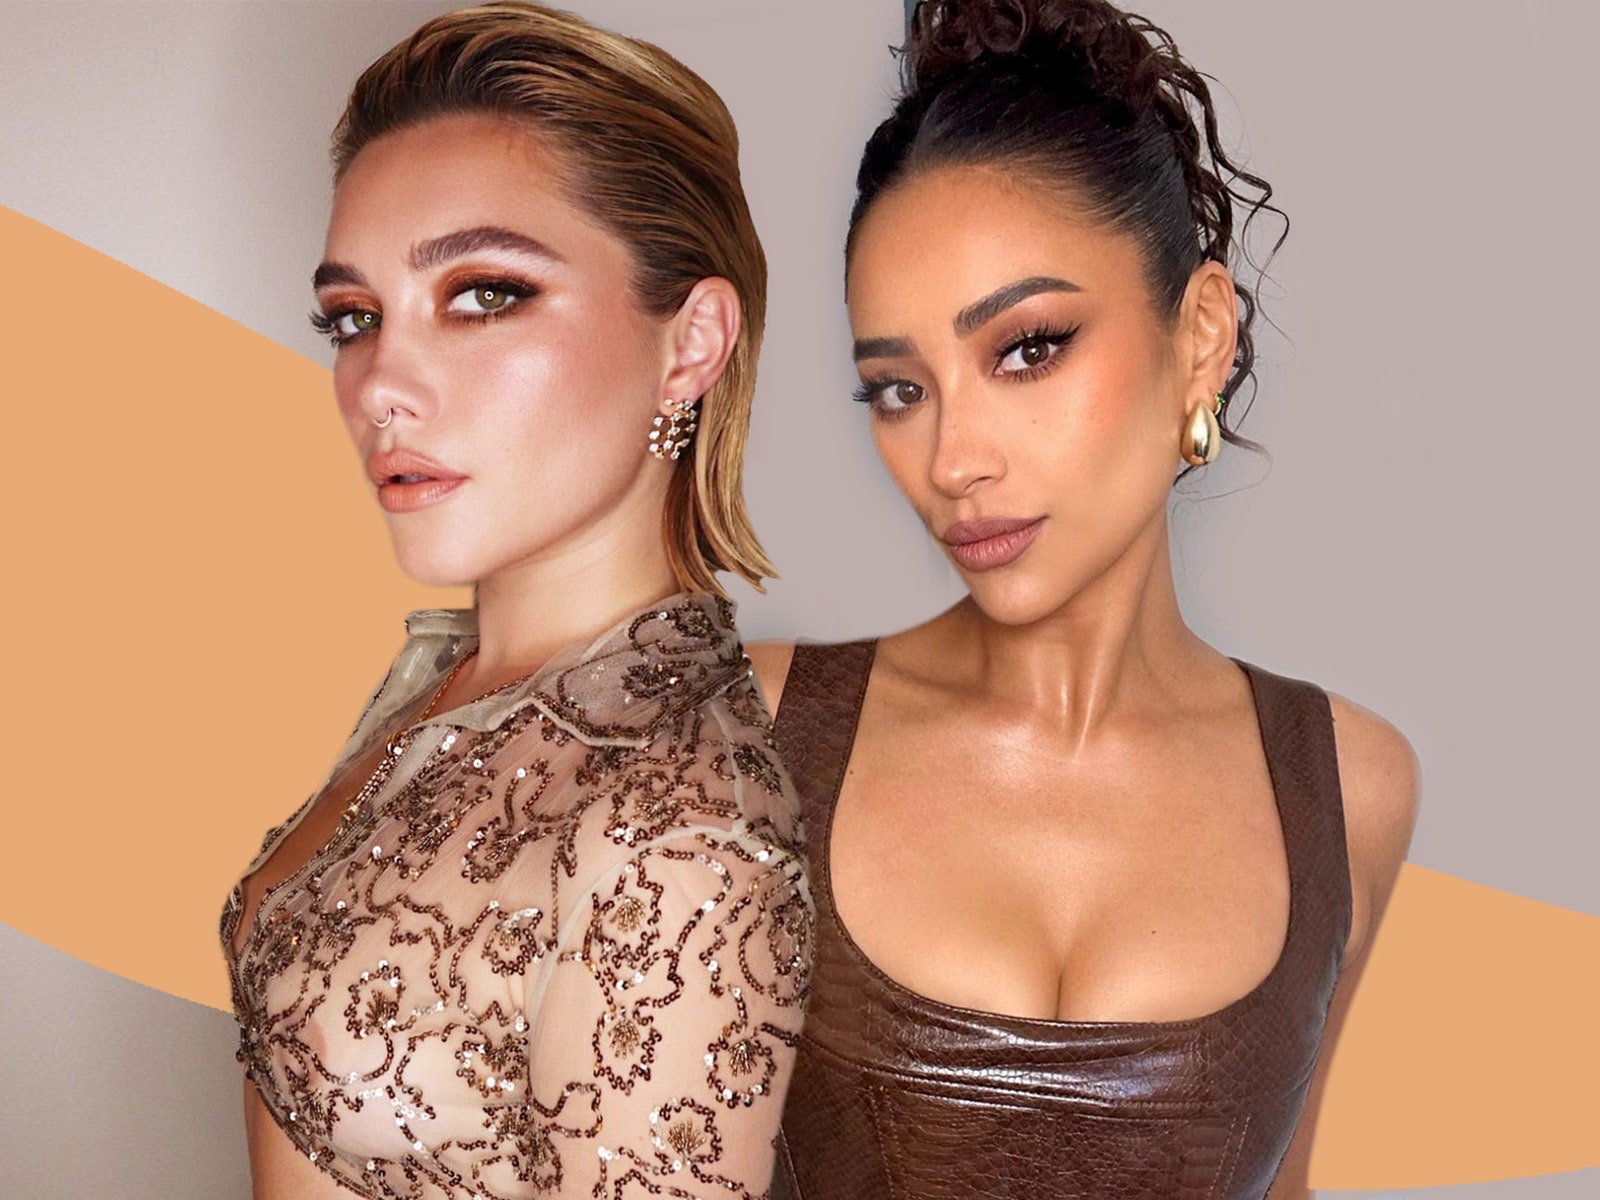 Pumpkin-spice makeup is trending for autumn, because of course it is